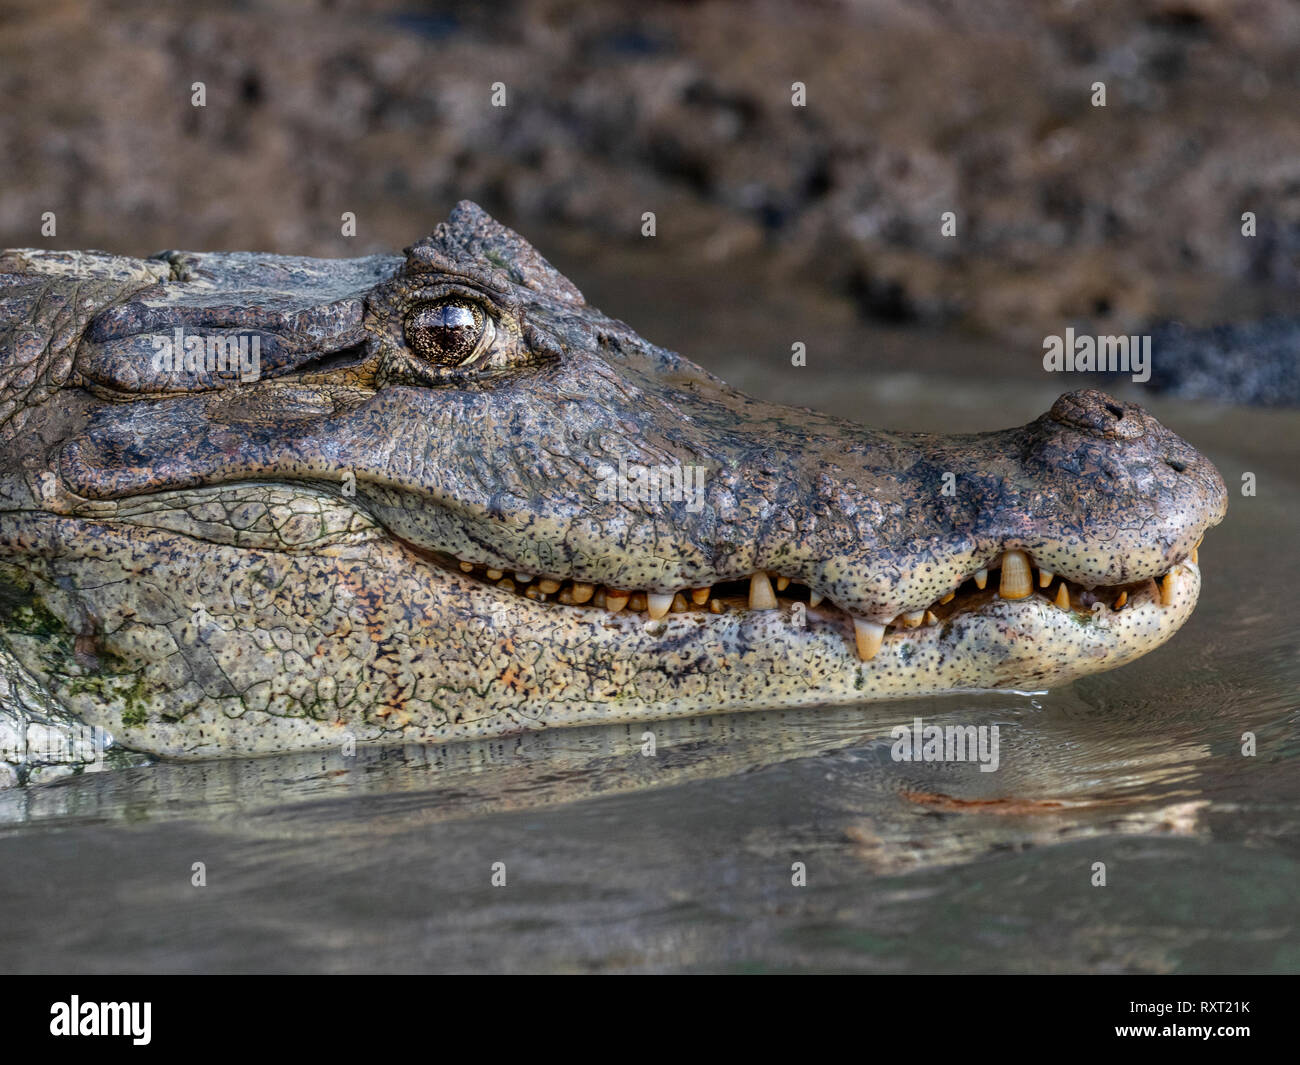 Spectacled caiman Caiman crocodilus   Cost Rica South America Stock Photo